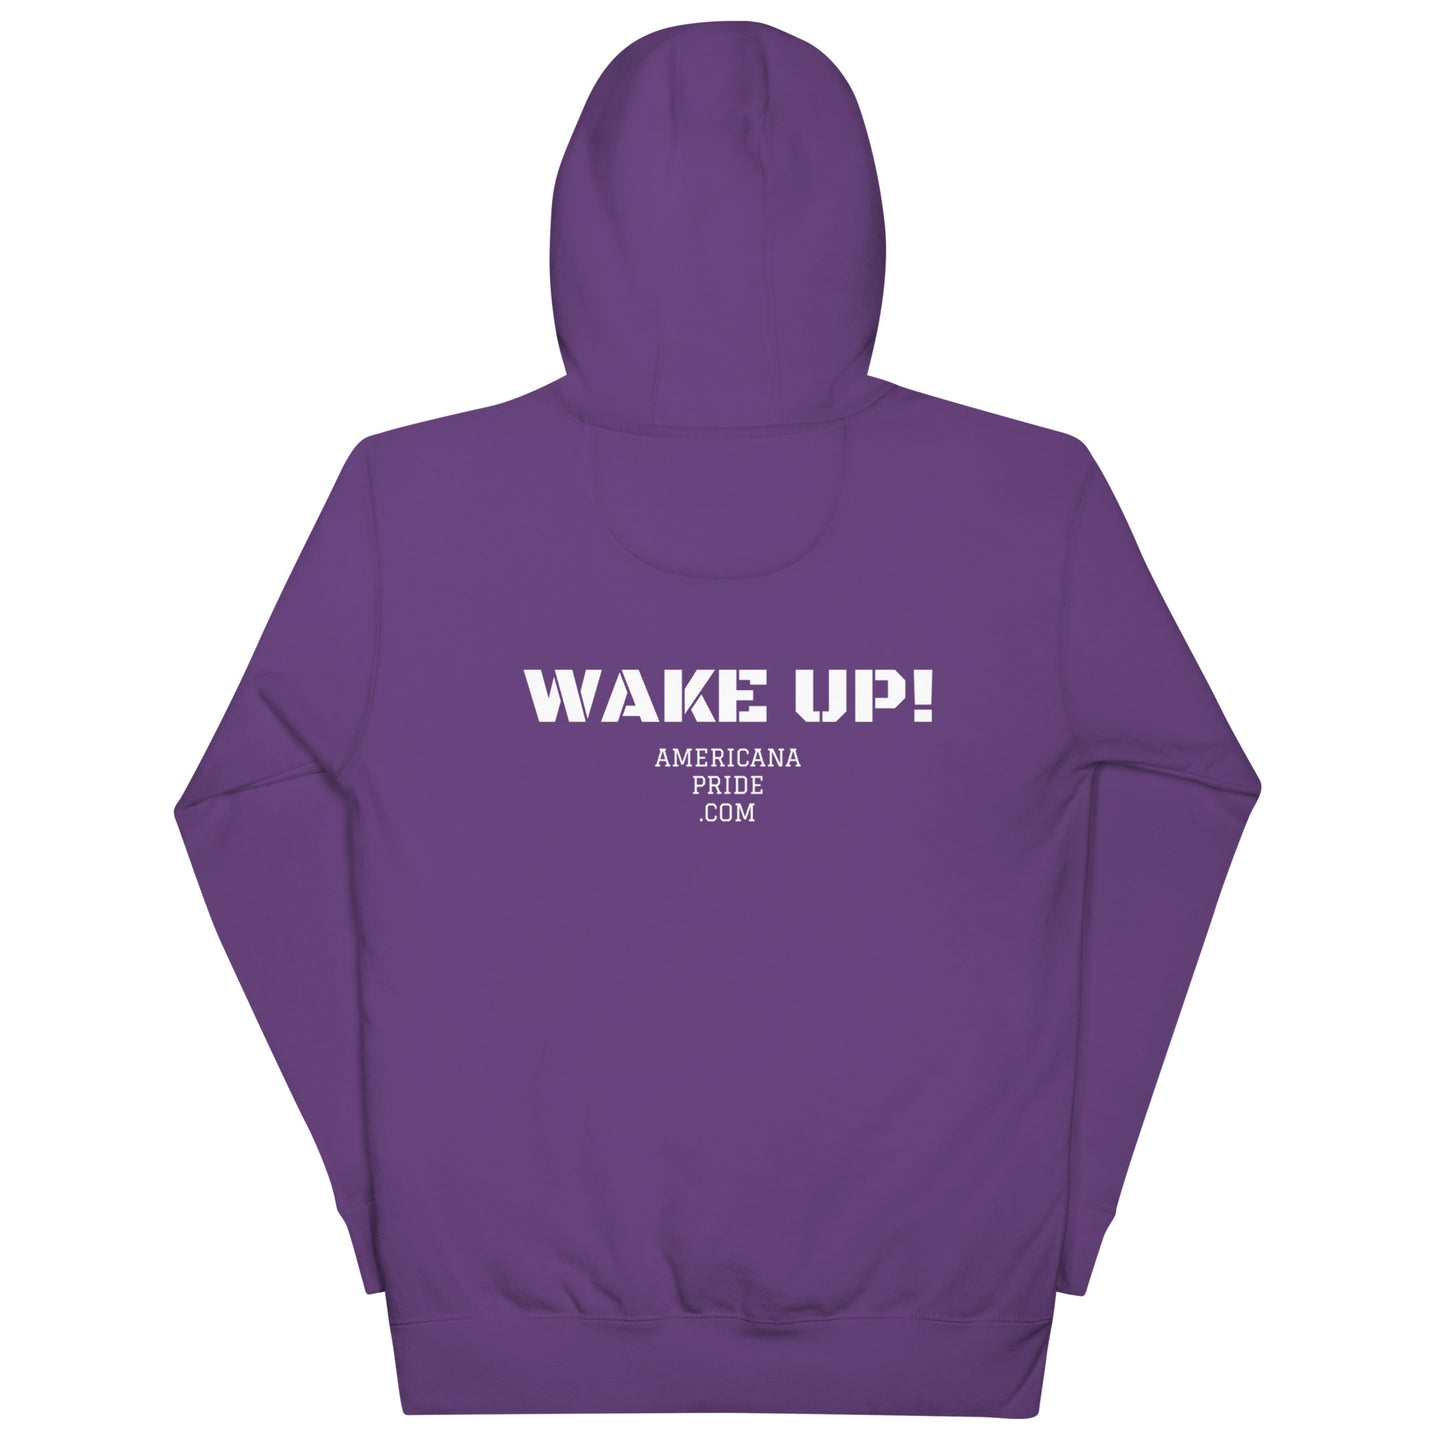 If you are not part of the movement, you ARE the movement - wake up!  Unisex Hoodie (white lettering)